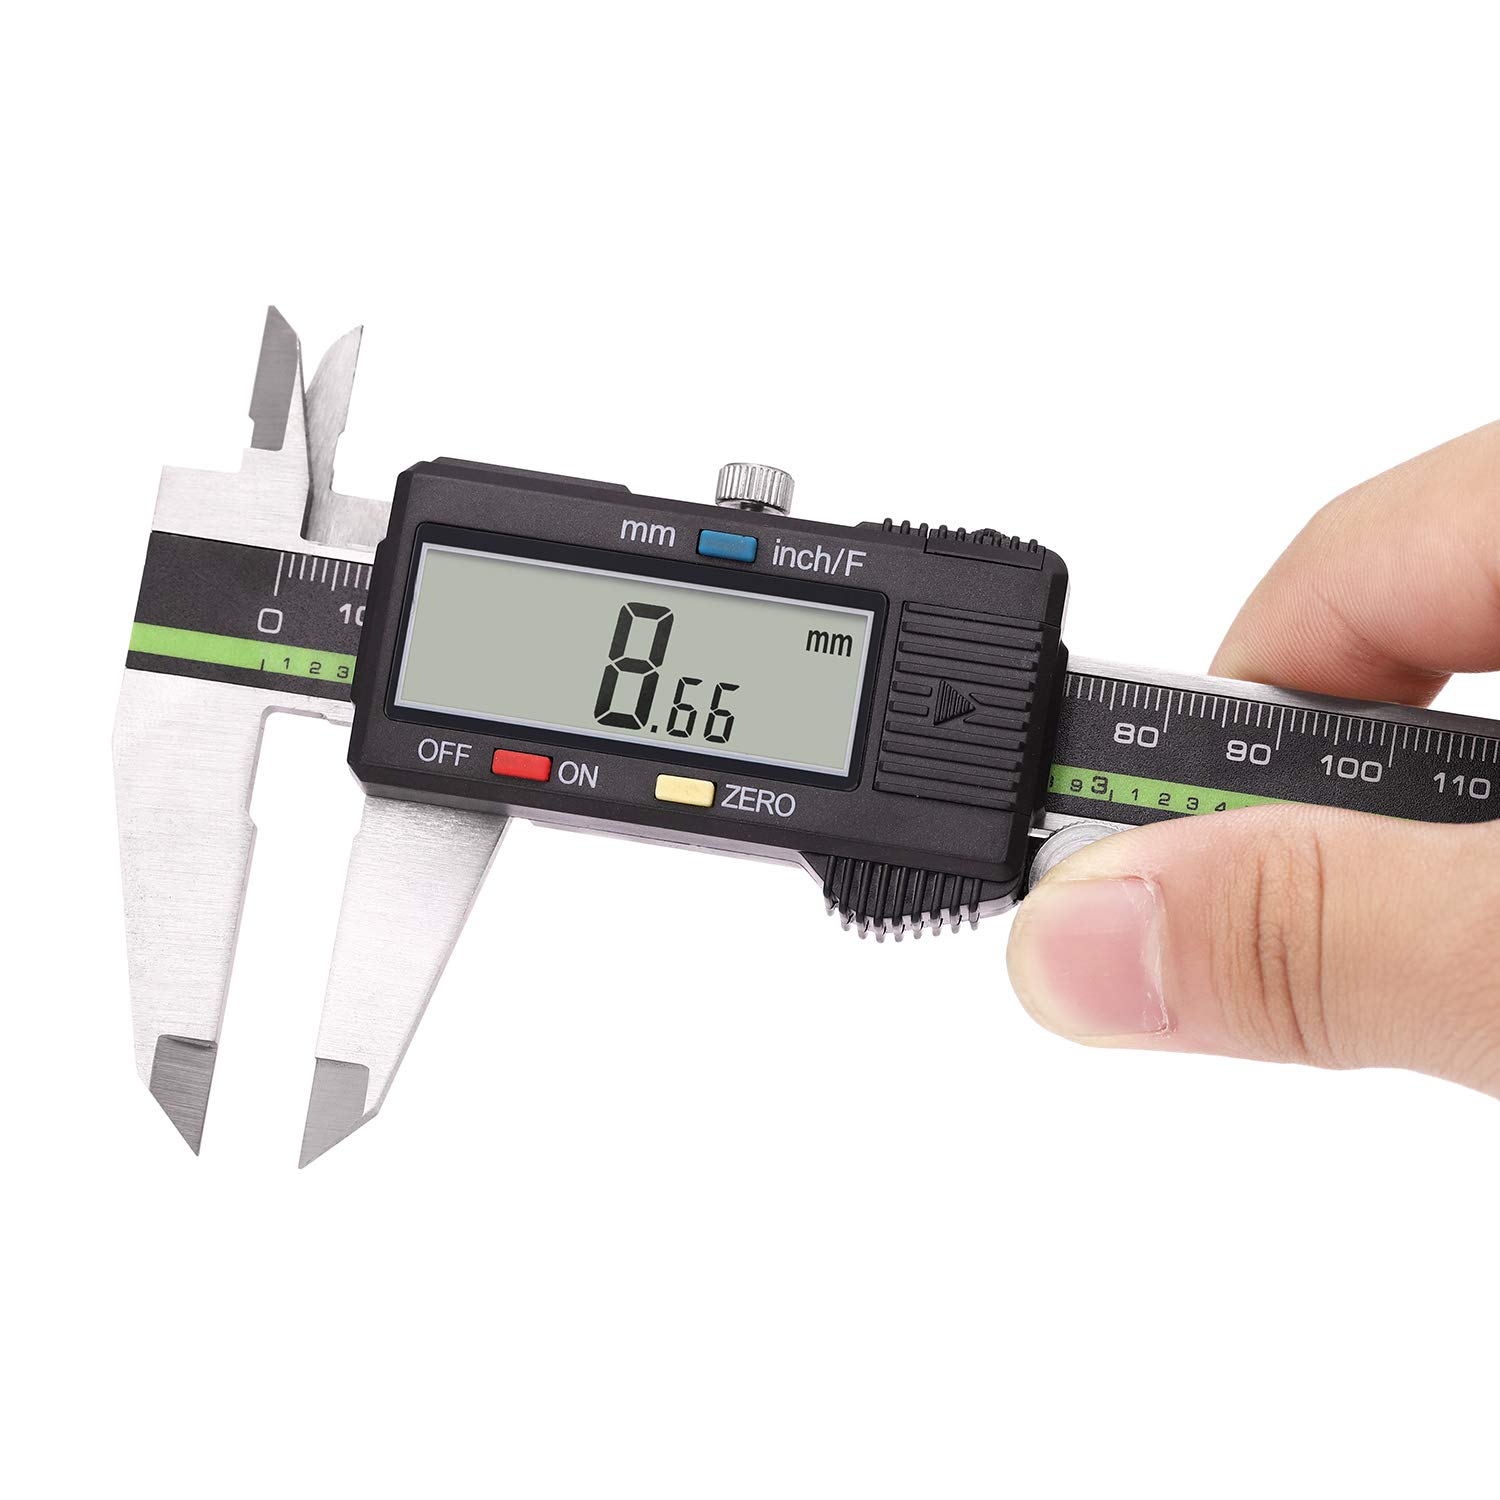 Digital Caliper 6 Inch Measuring Tool Stainless Steel Inch Fractions Milimeter 